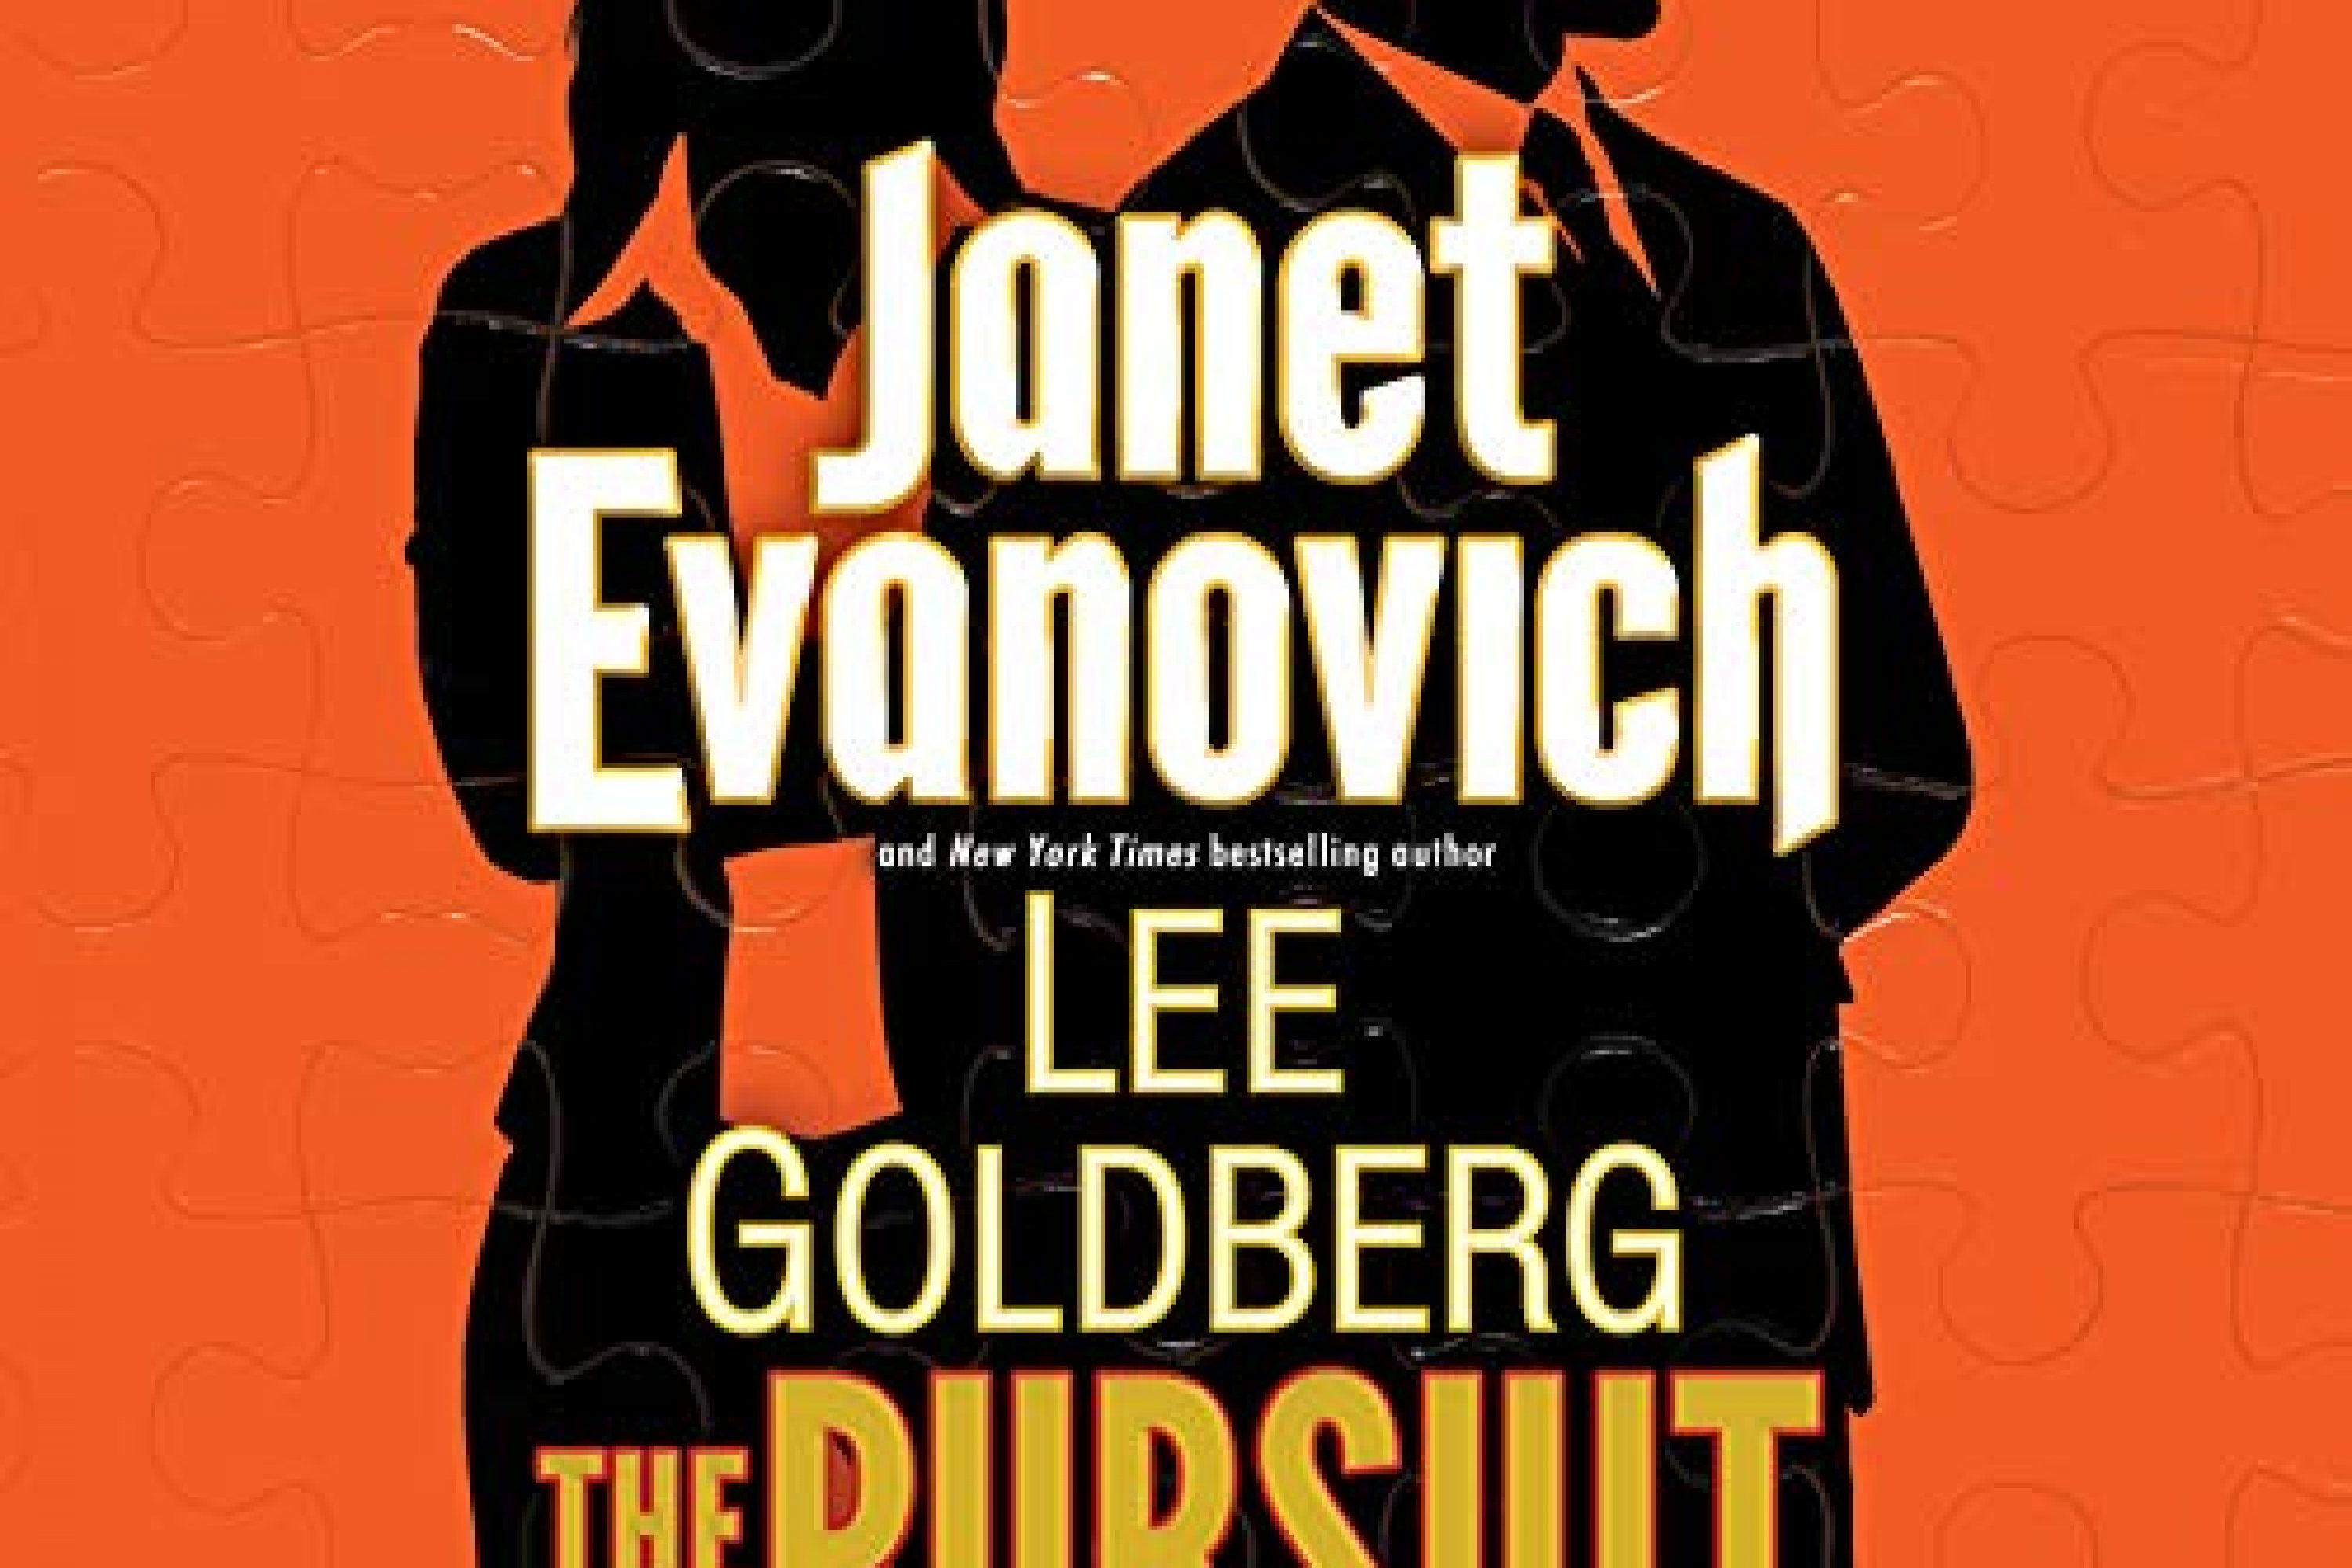 Audiobook Review: The Pursuit by Janet Evanovich and Lee Goldberg